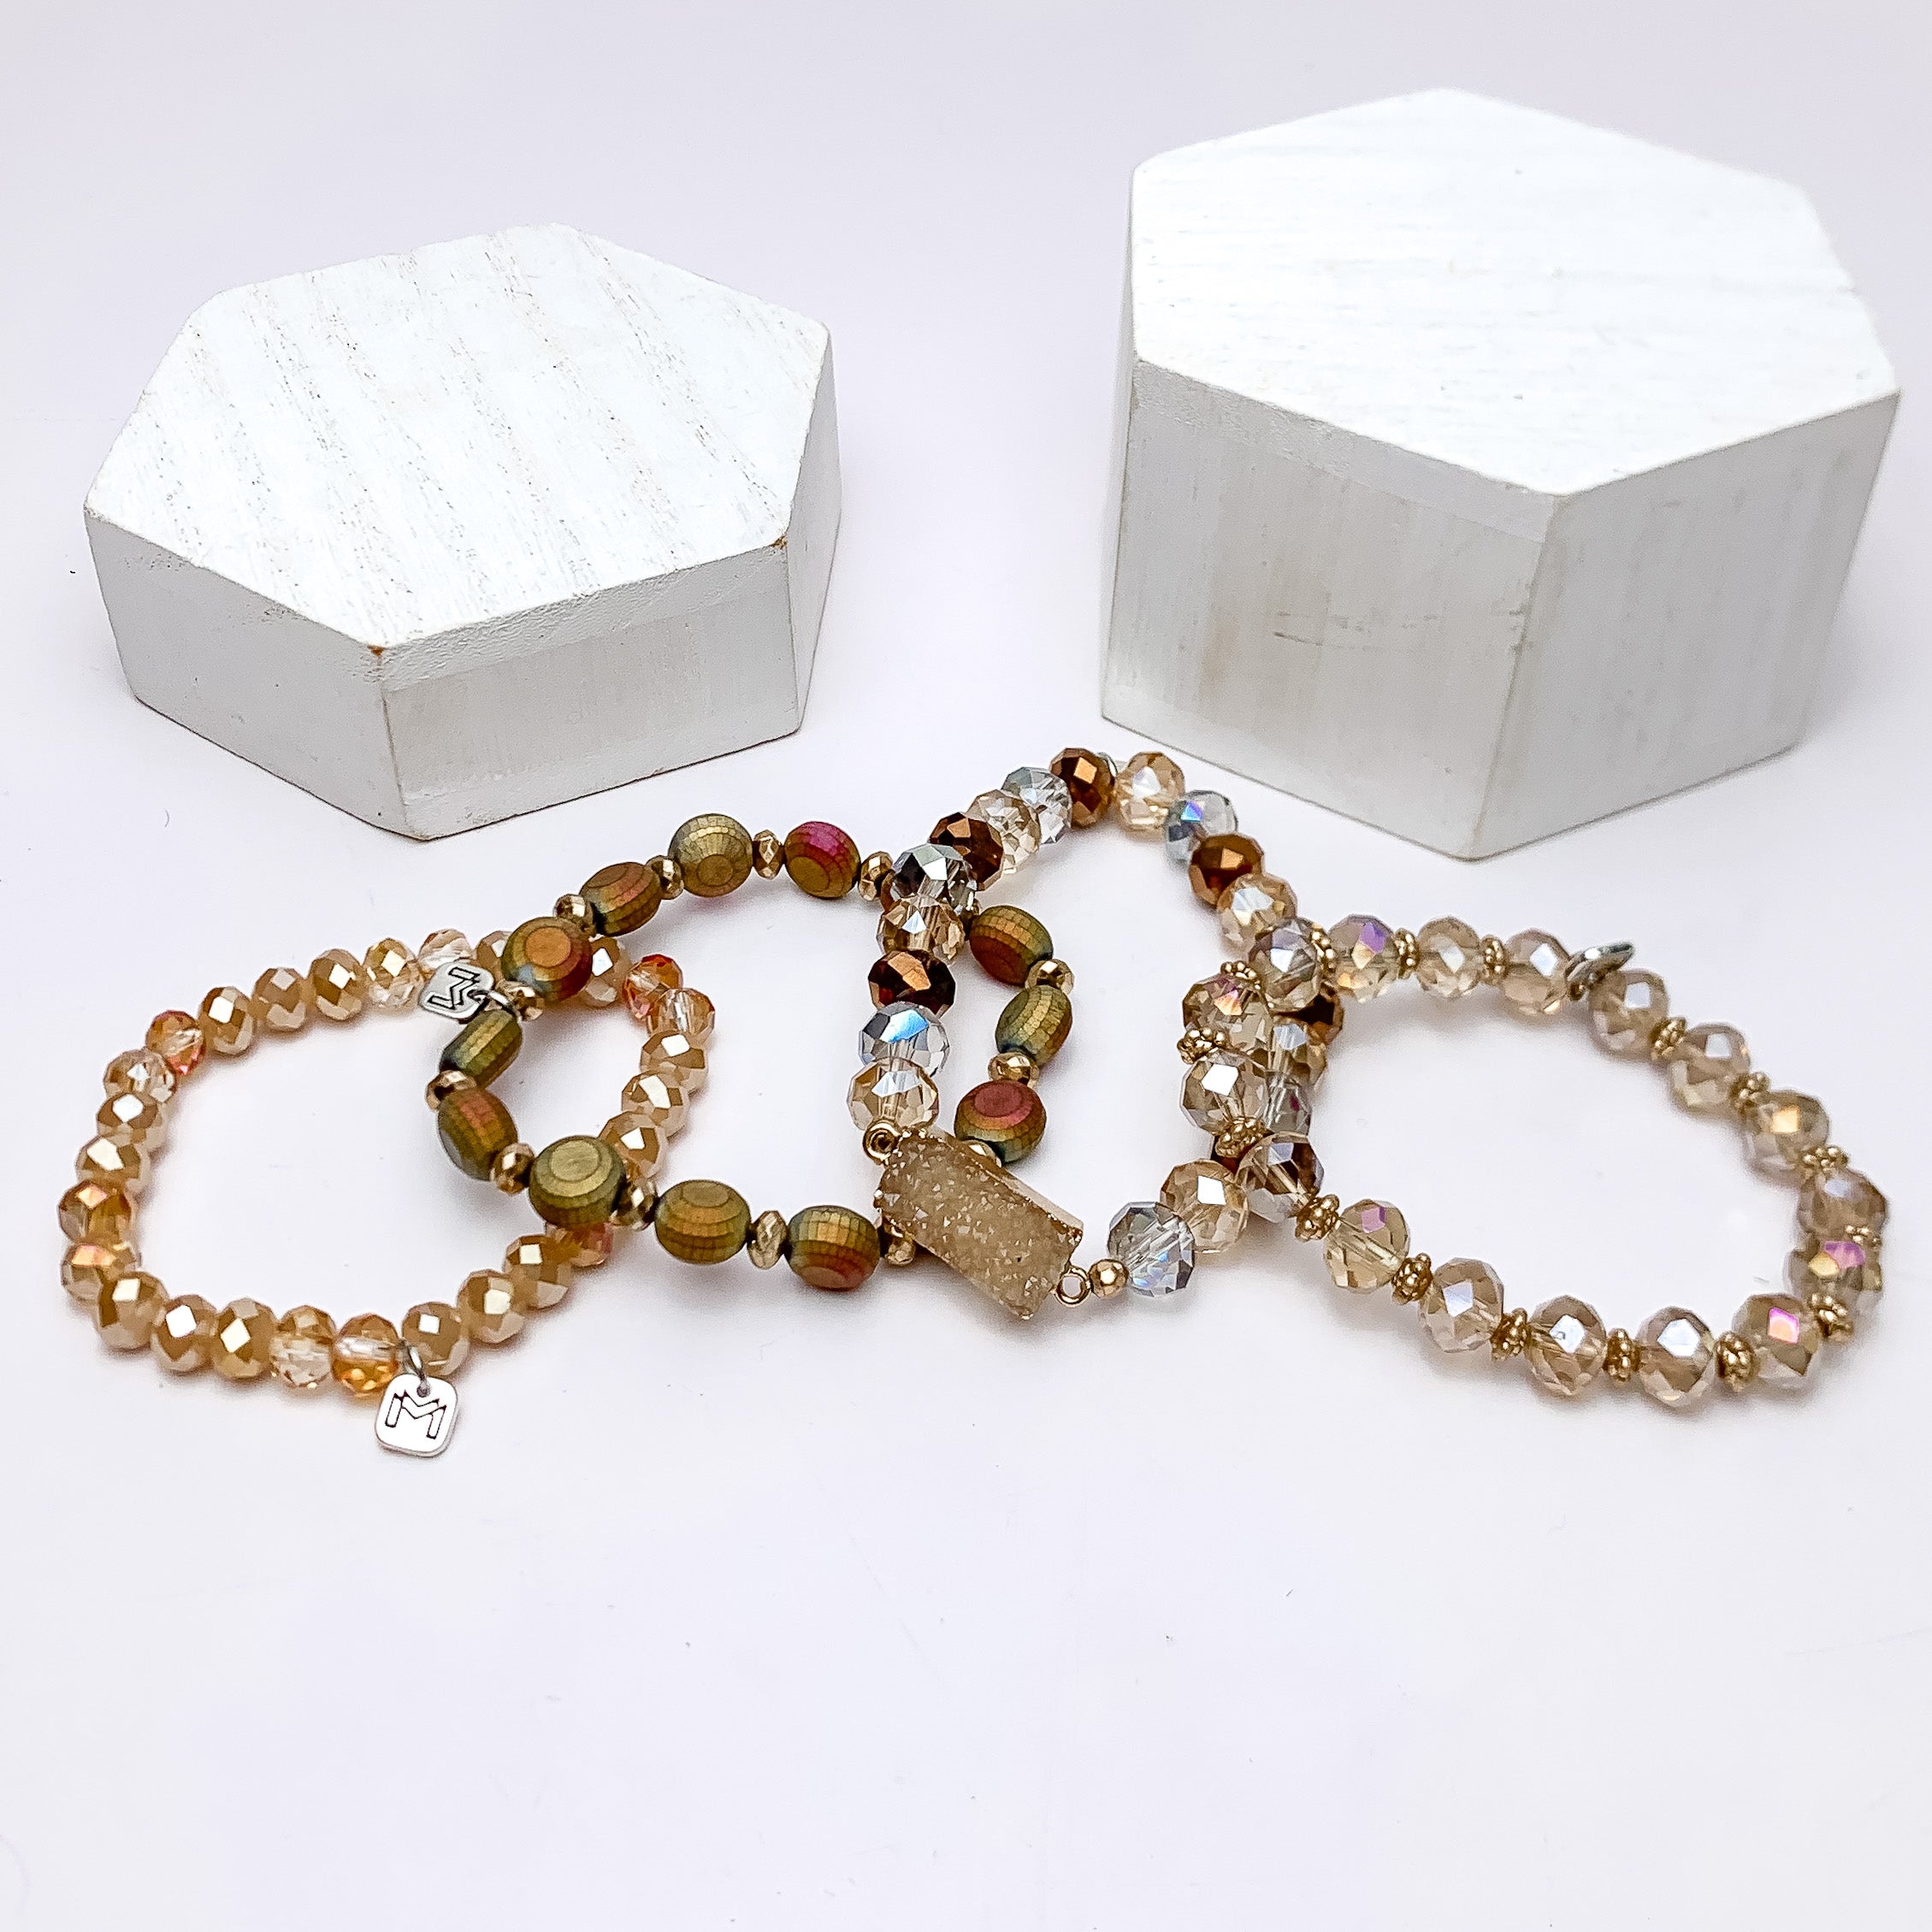 Set of Four | Crystal Beaded Bracelet Set in Gold Tones. These bracecelts are pictured on a white background with two white podiums behind them.